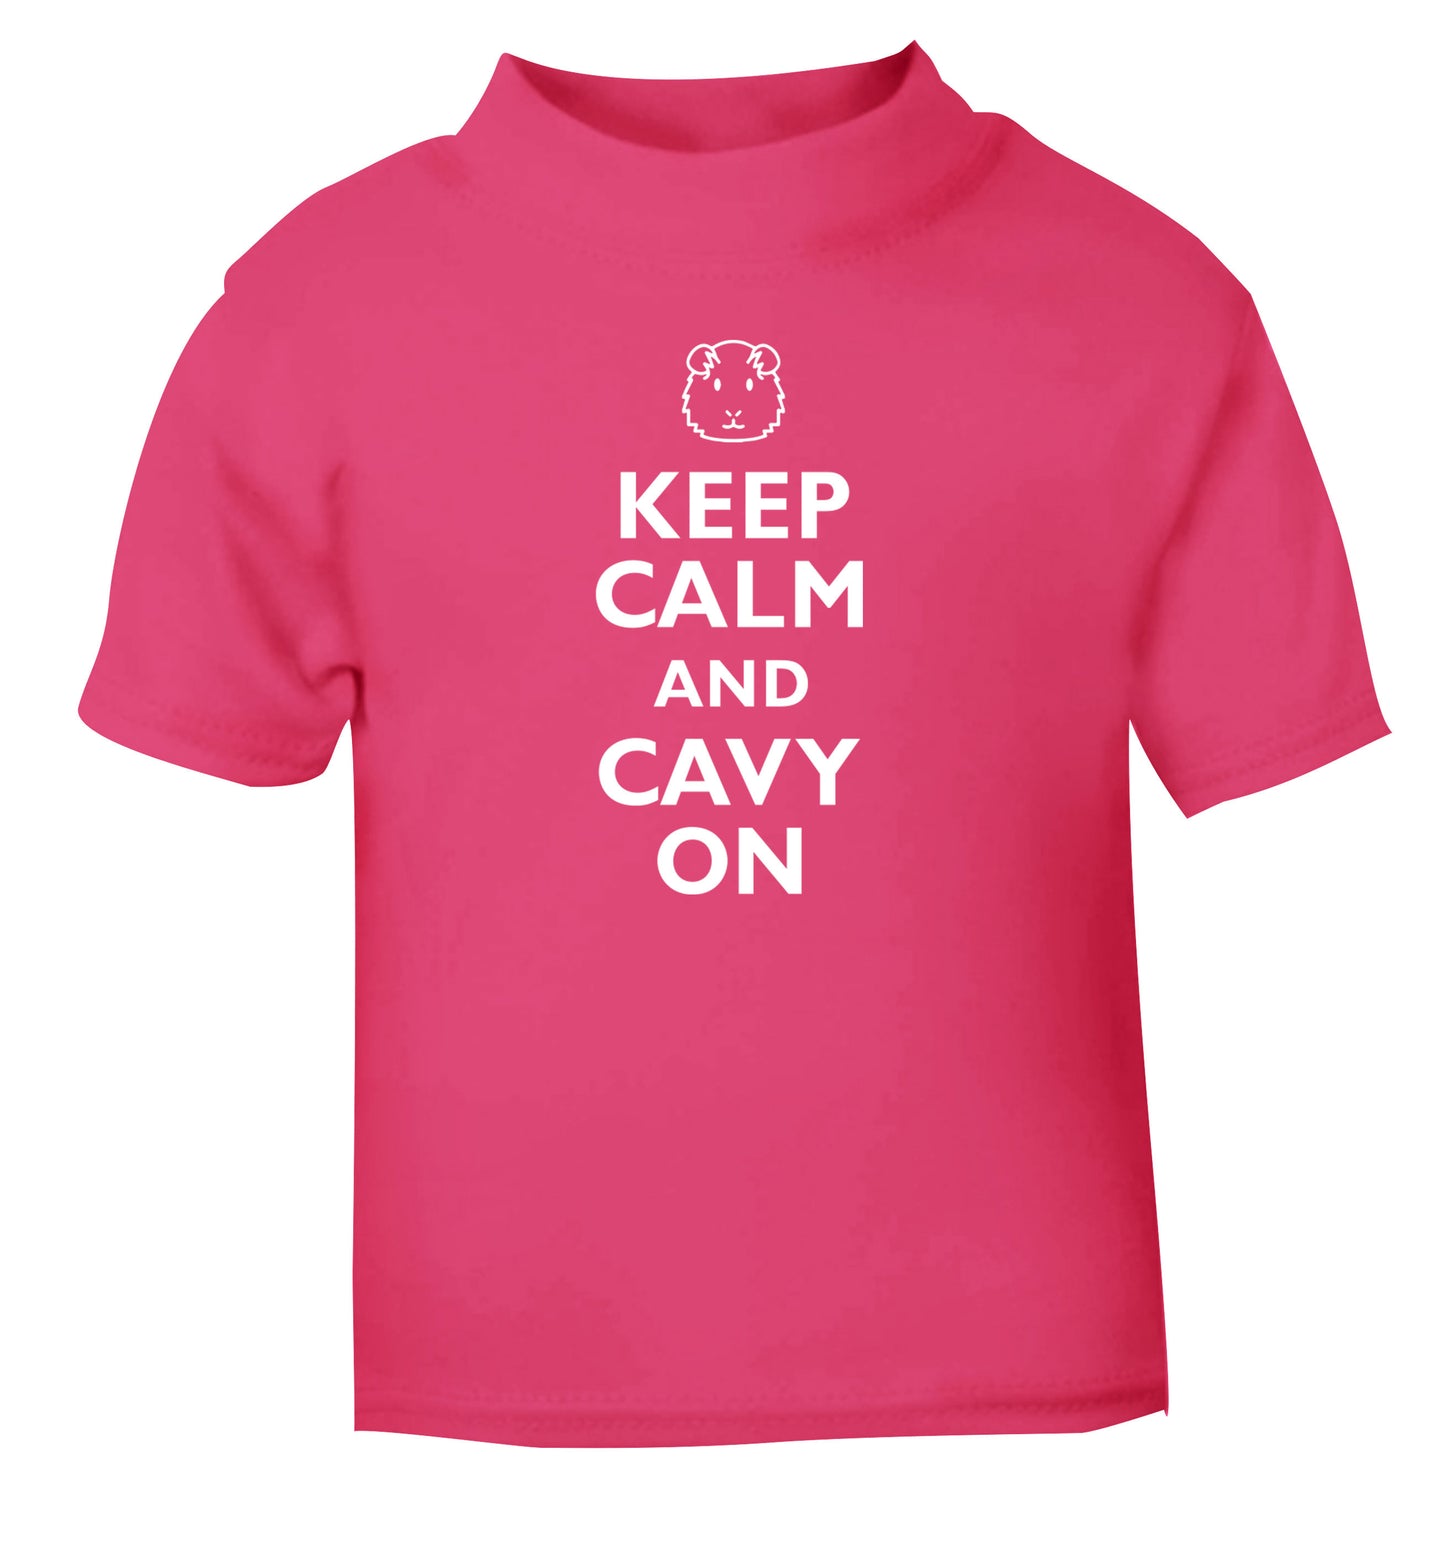 Keep calm and cavvy on pink Baby Toddler Tshirt 2 Years